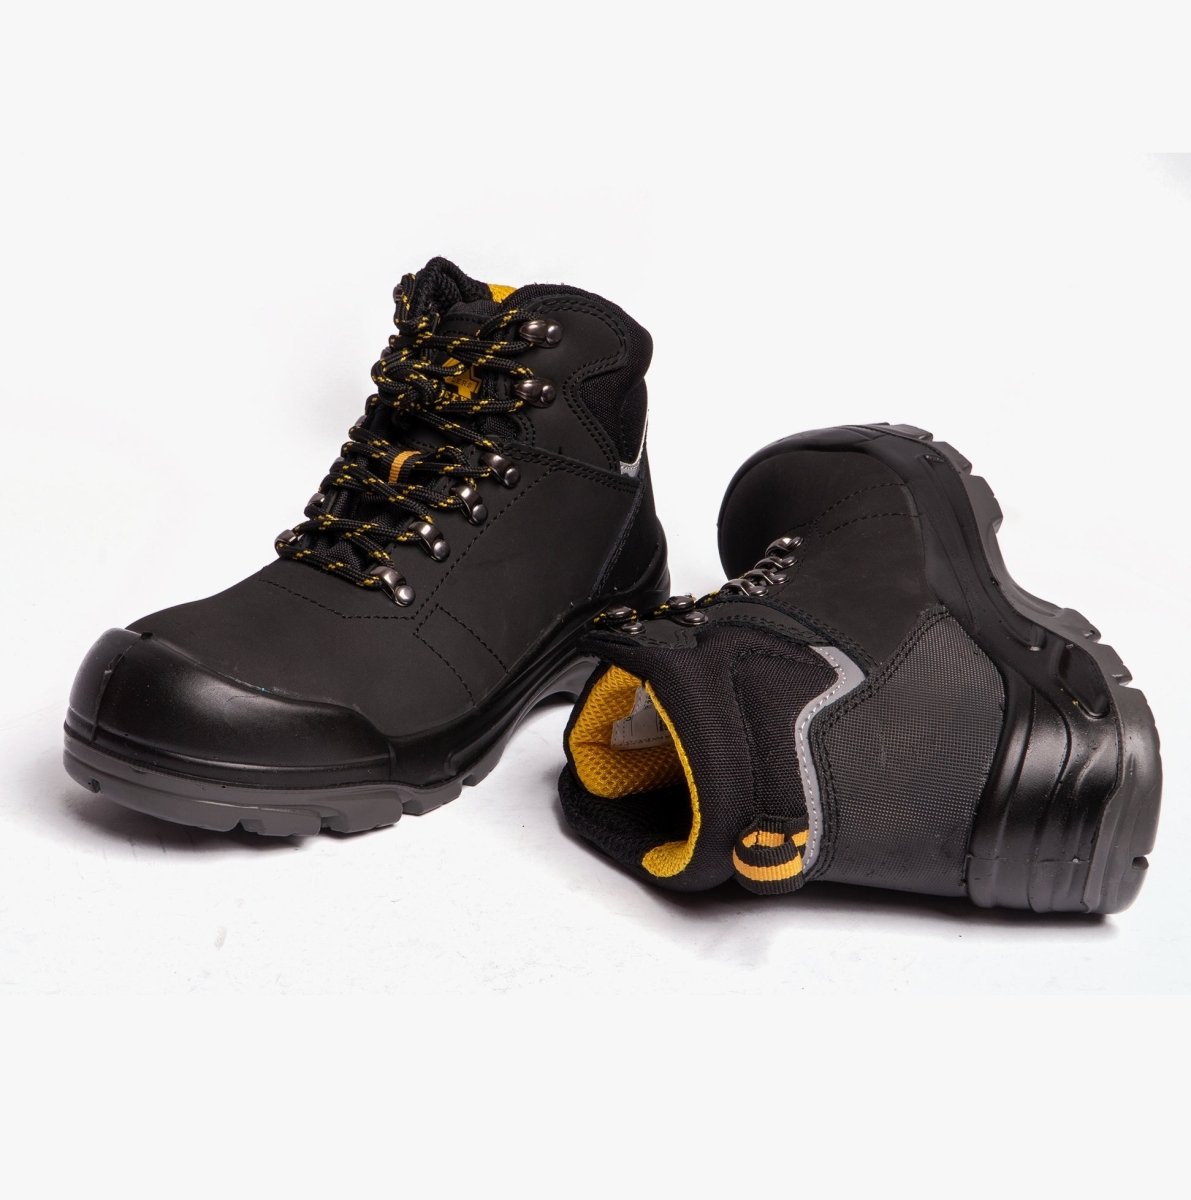 Amblers Safety AS252 DELAMERE Unisex Nubuck Leather Safety Boots Black 25509 - 42430 - 04 | STB.co.uk